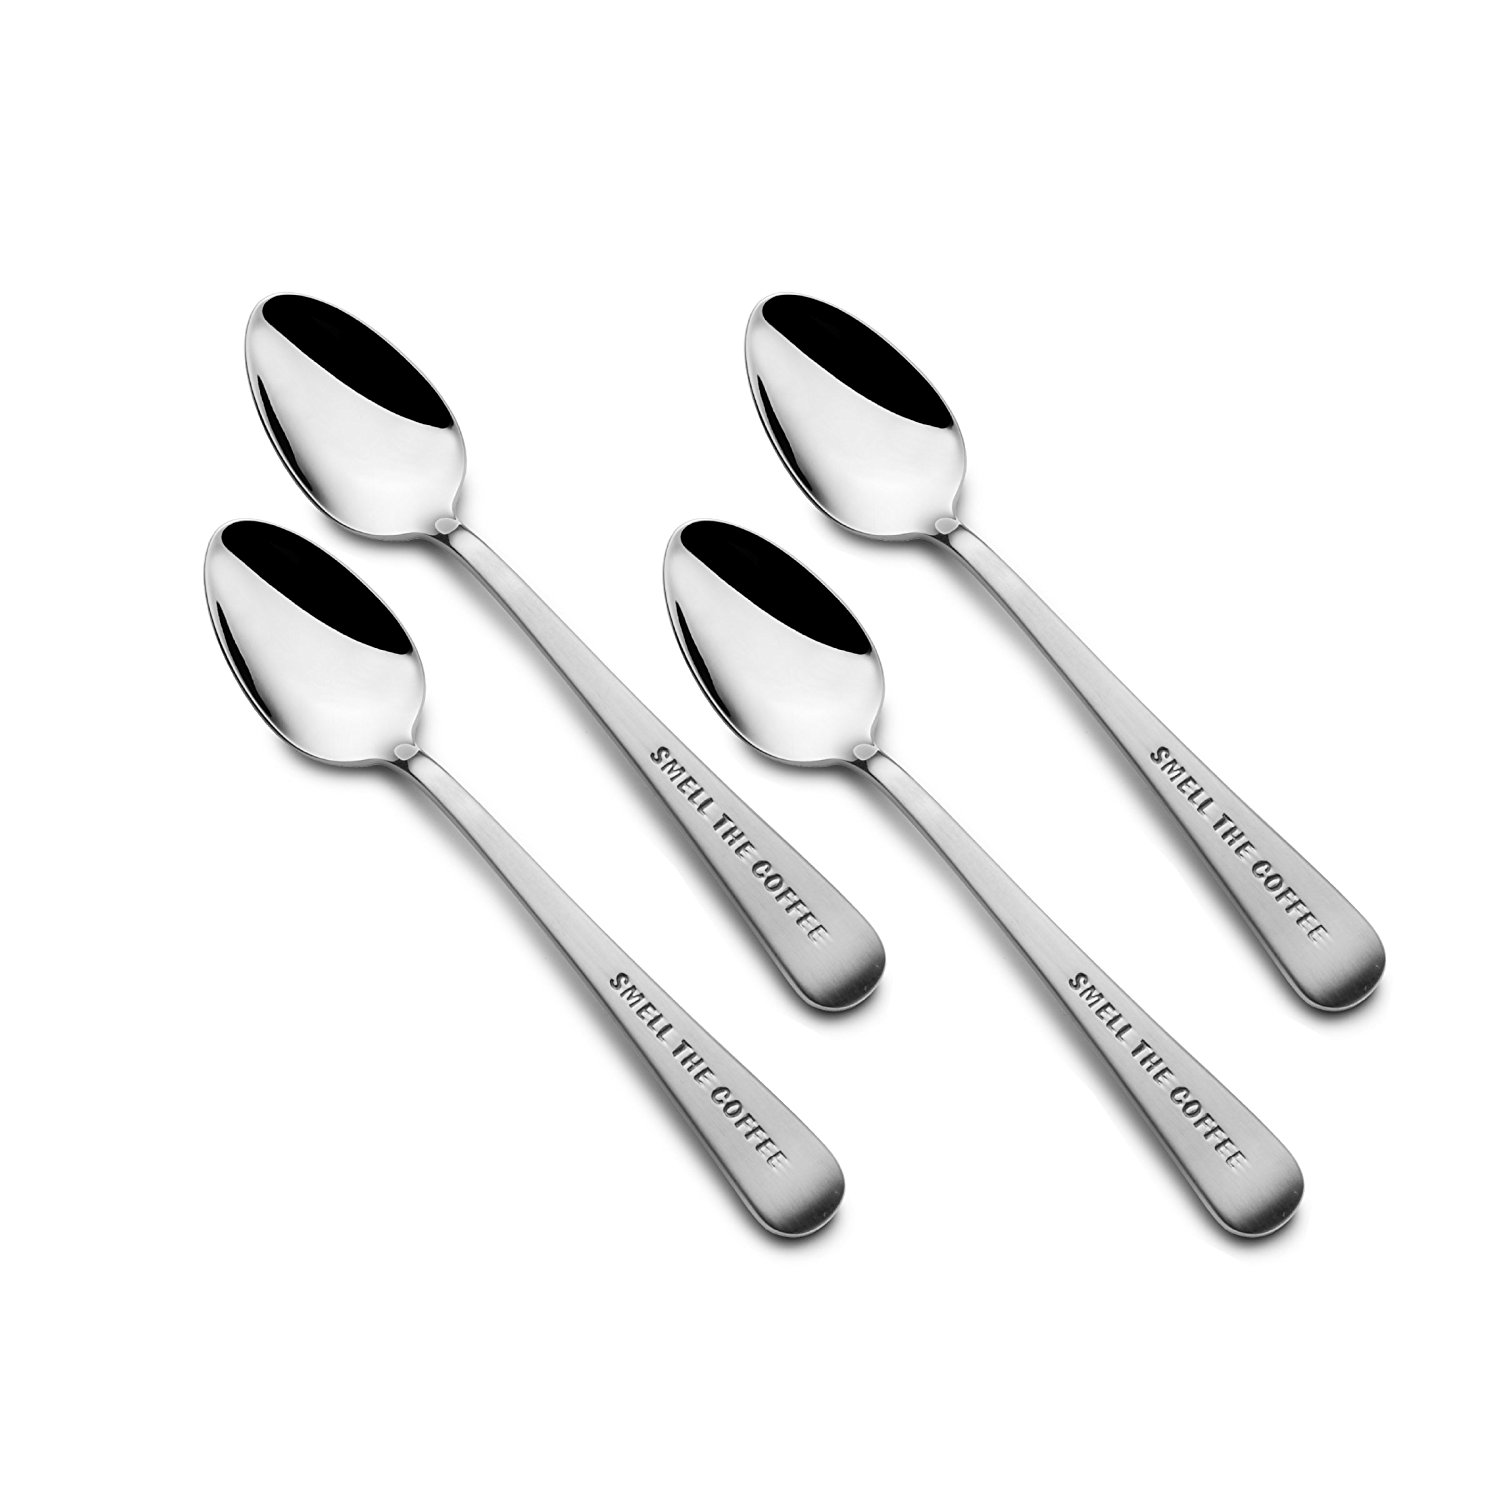 Amazon.com: Towle Living Expressions Demitasse Spoons, Set of 4 ...